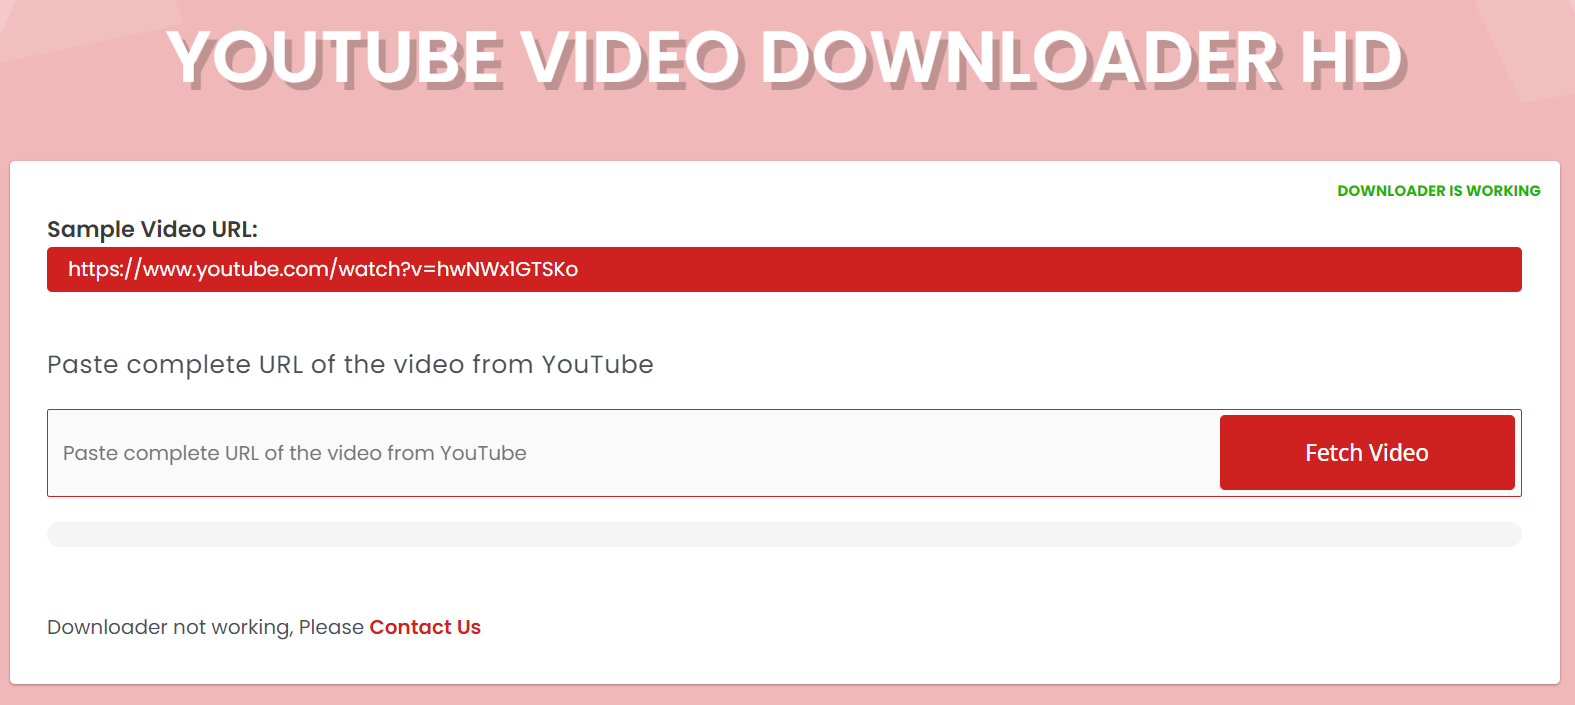 Downloading YouTube Videos